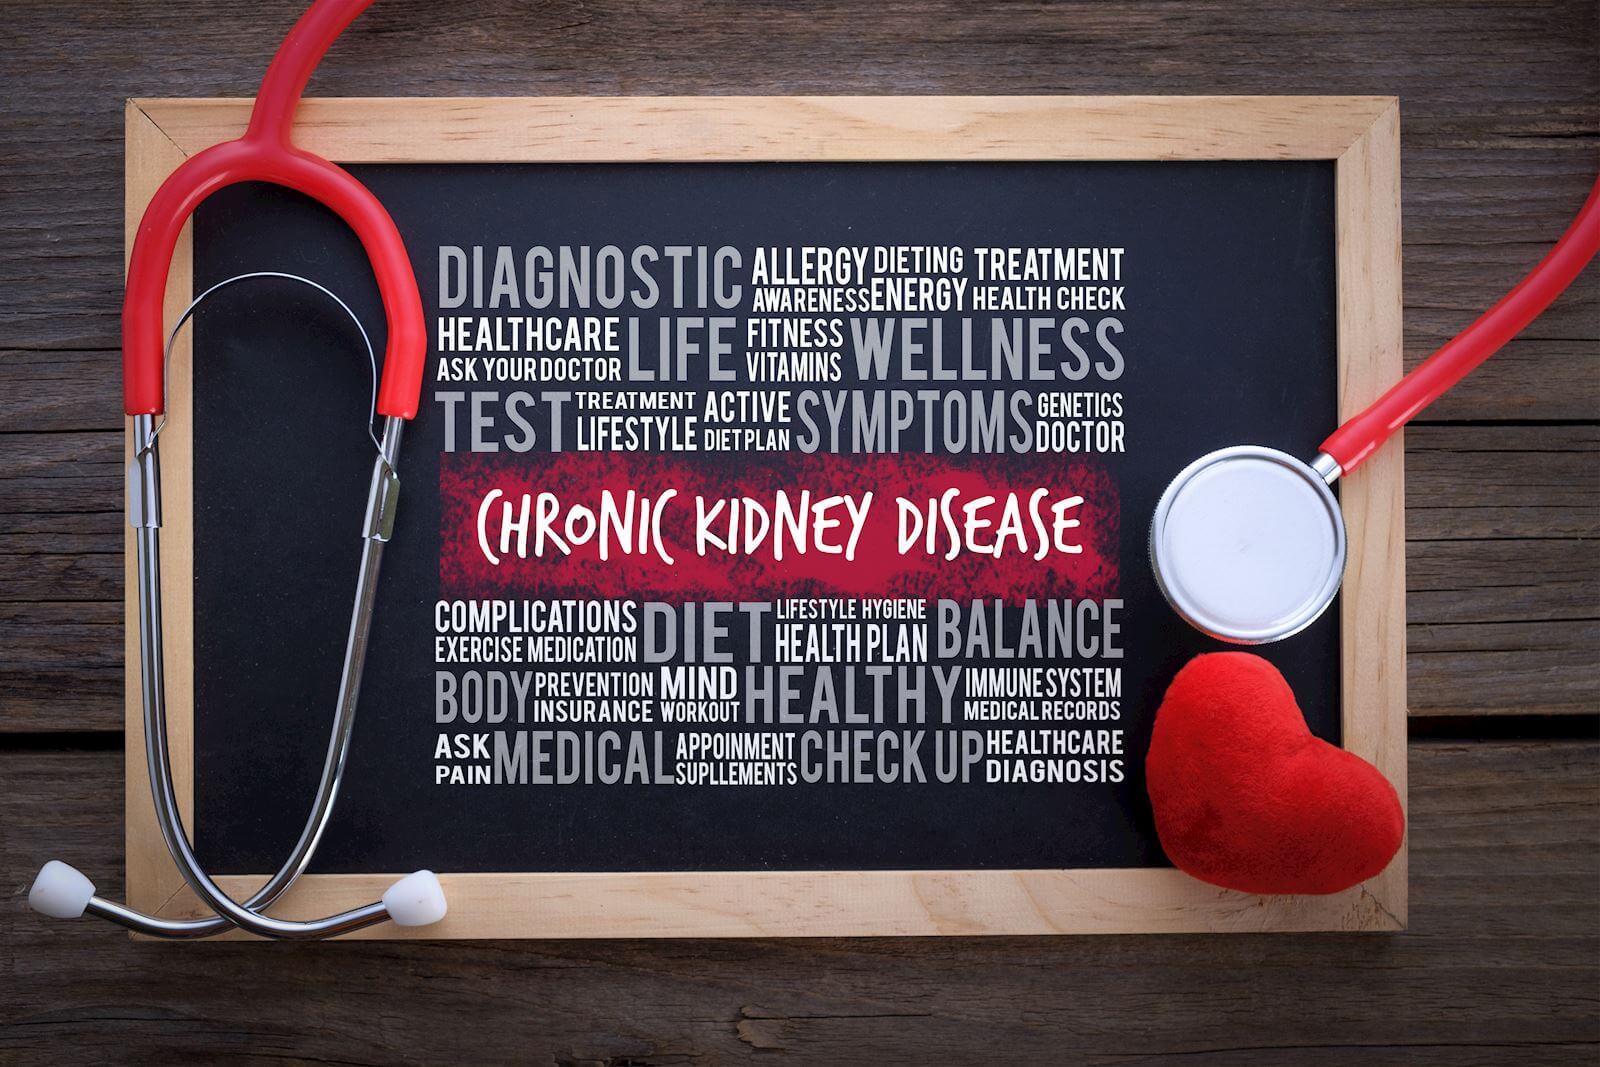 Did you know that kidney disease is the ninth leading cause of death in the United States?